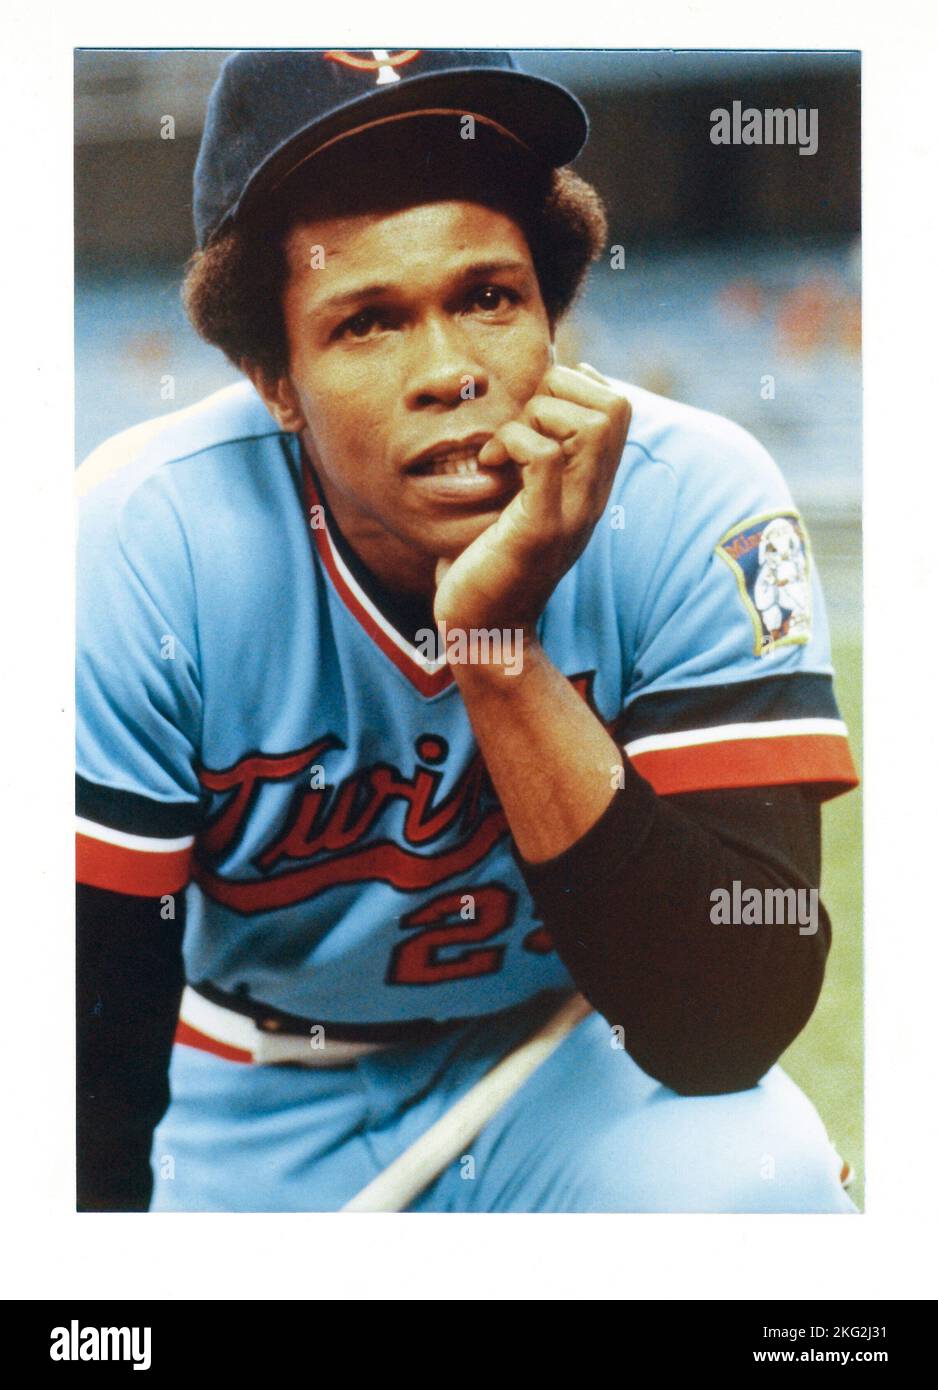 A posed portrait of Hall of Fame first baseman Rod Carew of the Minnesota Twins. At Yankee stadium in 1982. Stock Photo